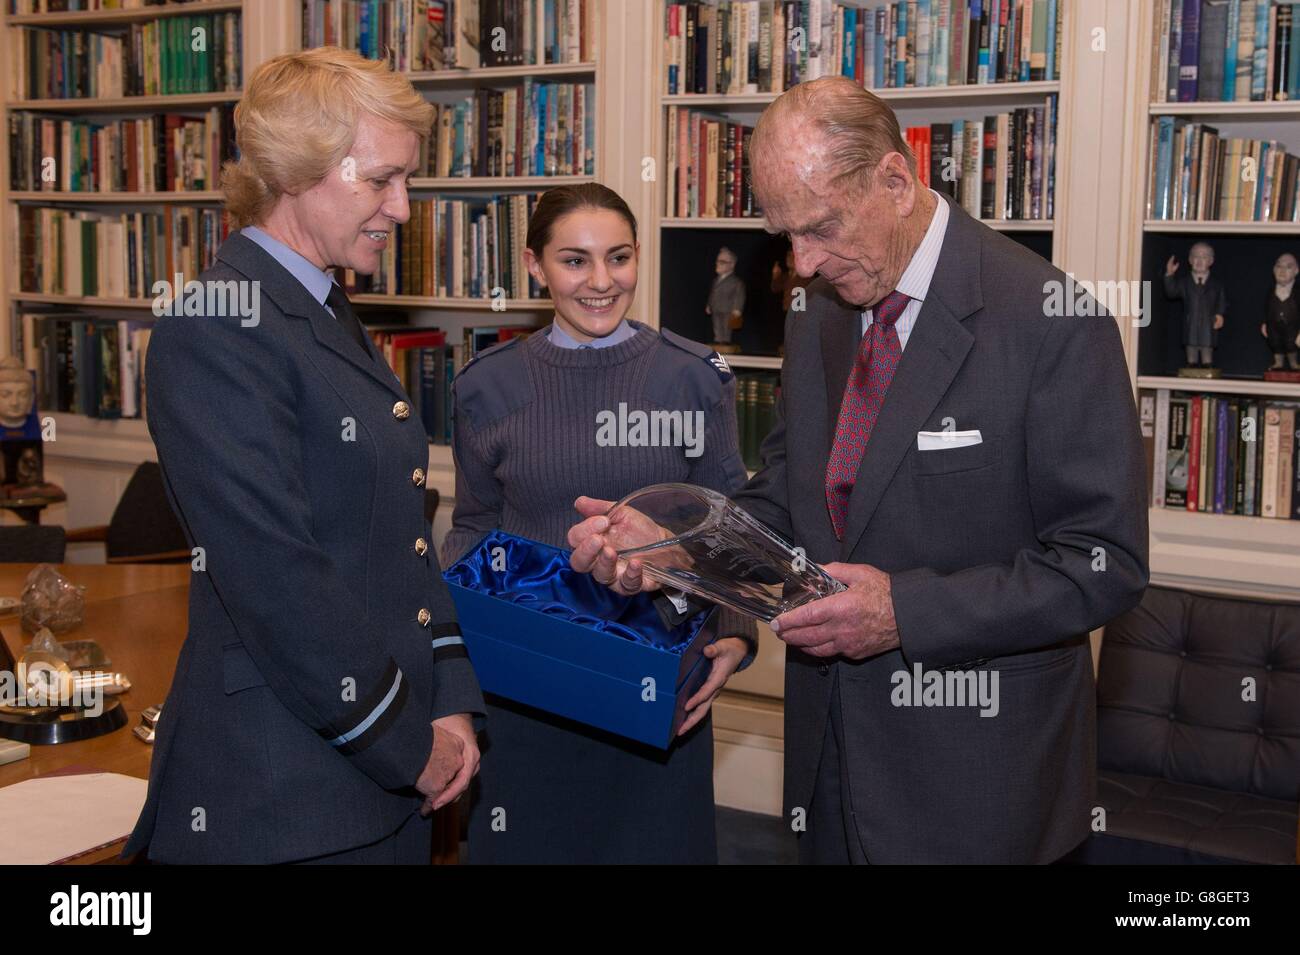 Cadet Sergeant Bronwyn Jacobs (centre) stands with the Duke of Edinburgh as he is presented with a gift of a vase from Air Commodore Dawn McCafferty Commandant of the Air Cadet organisation (left) at Buckingham Palace in London, as he retired from the post of Air Commodore in Chief and on the occasion of the Duchess of Cambridge becoming Honorary Air Commandant of the Air Cadets. Stock Photo